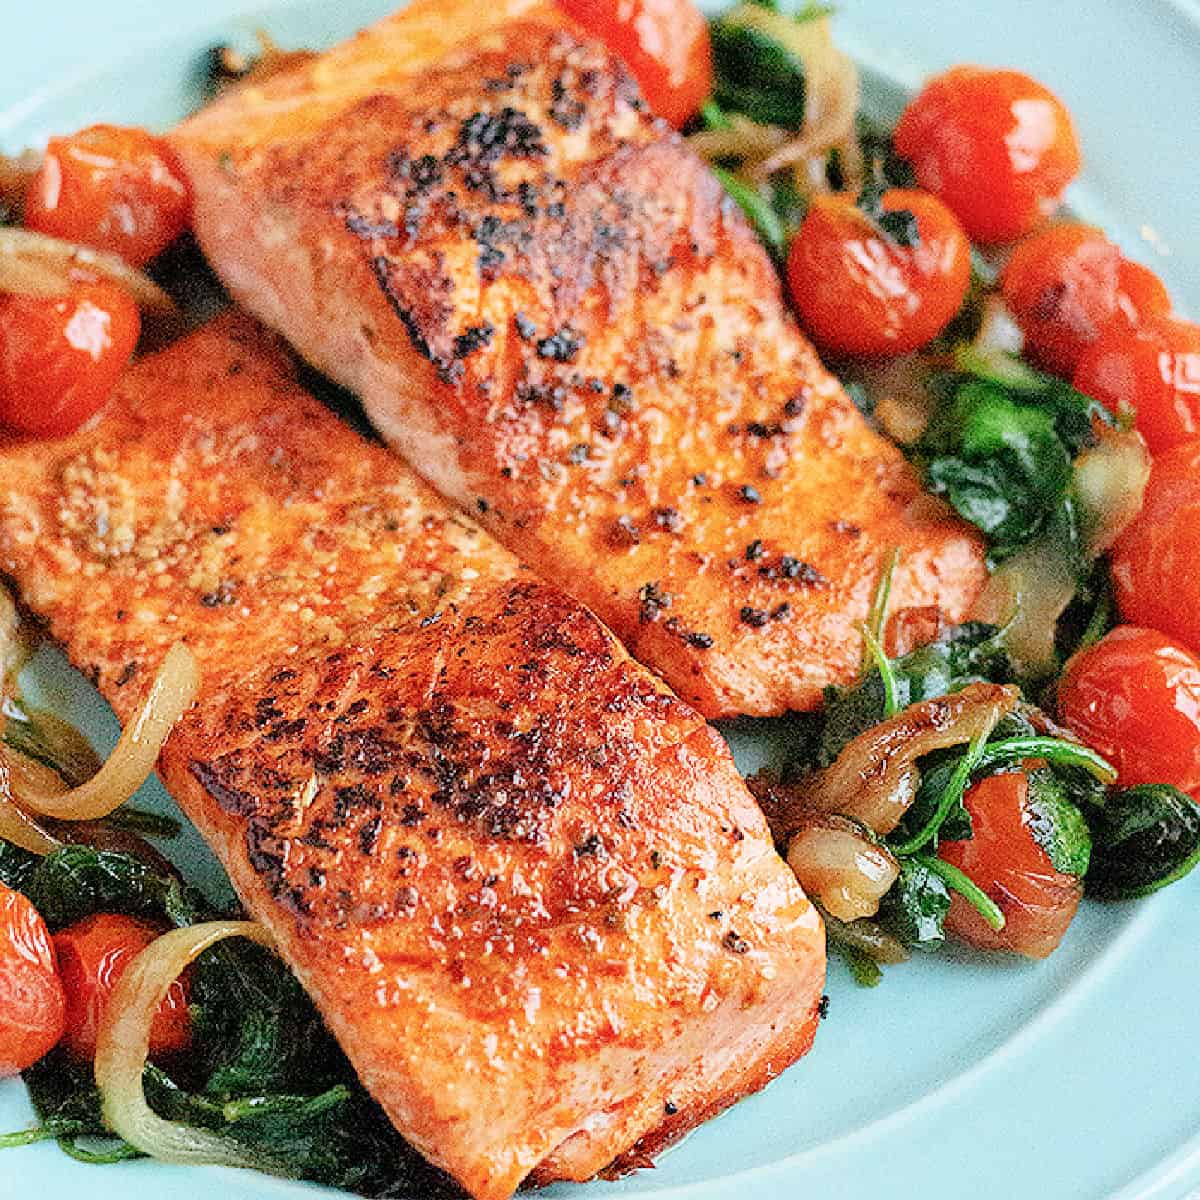 Everything you need to know about pan seared salmon. From what salmon to get to a fool proof how-to. Watch the step-by-step video tutorial to learn how to make the best pan seared salmon that's crispy on the outside and juicy on the inside. 
